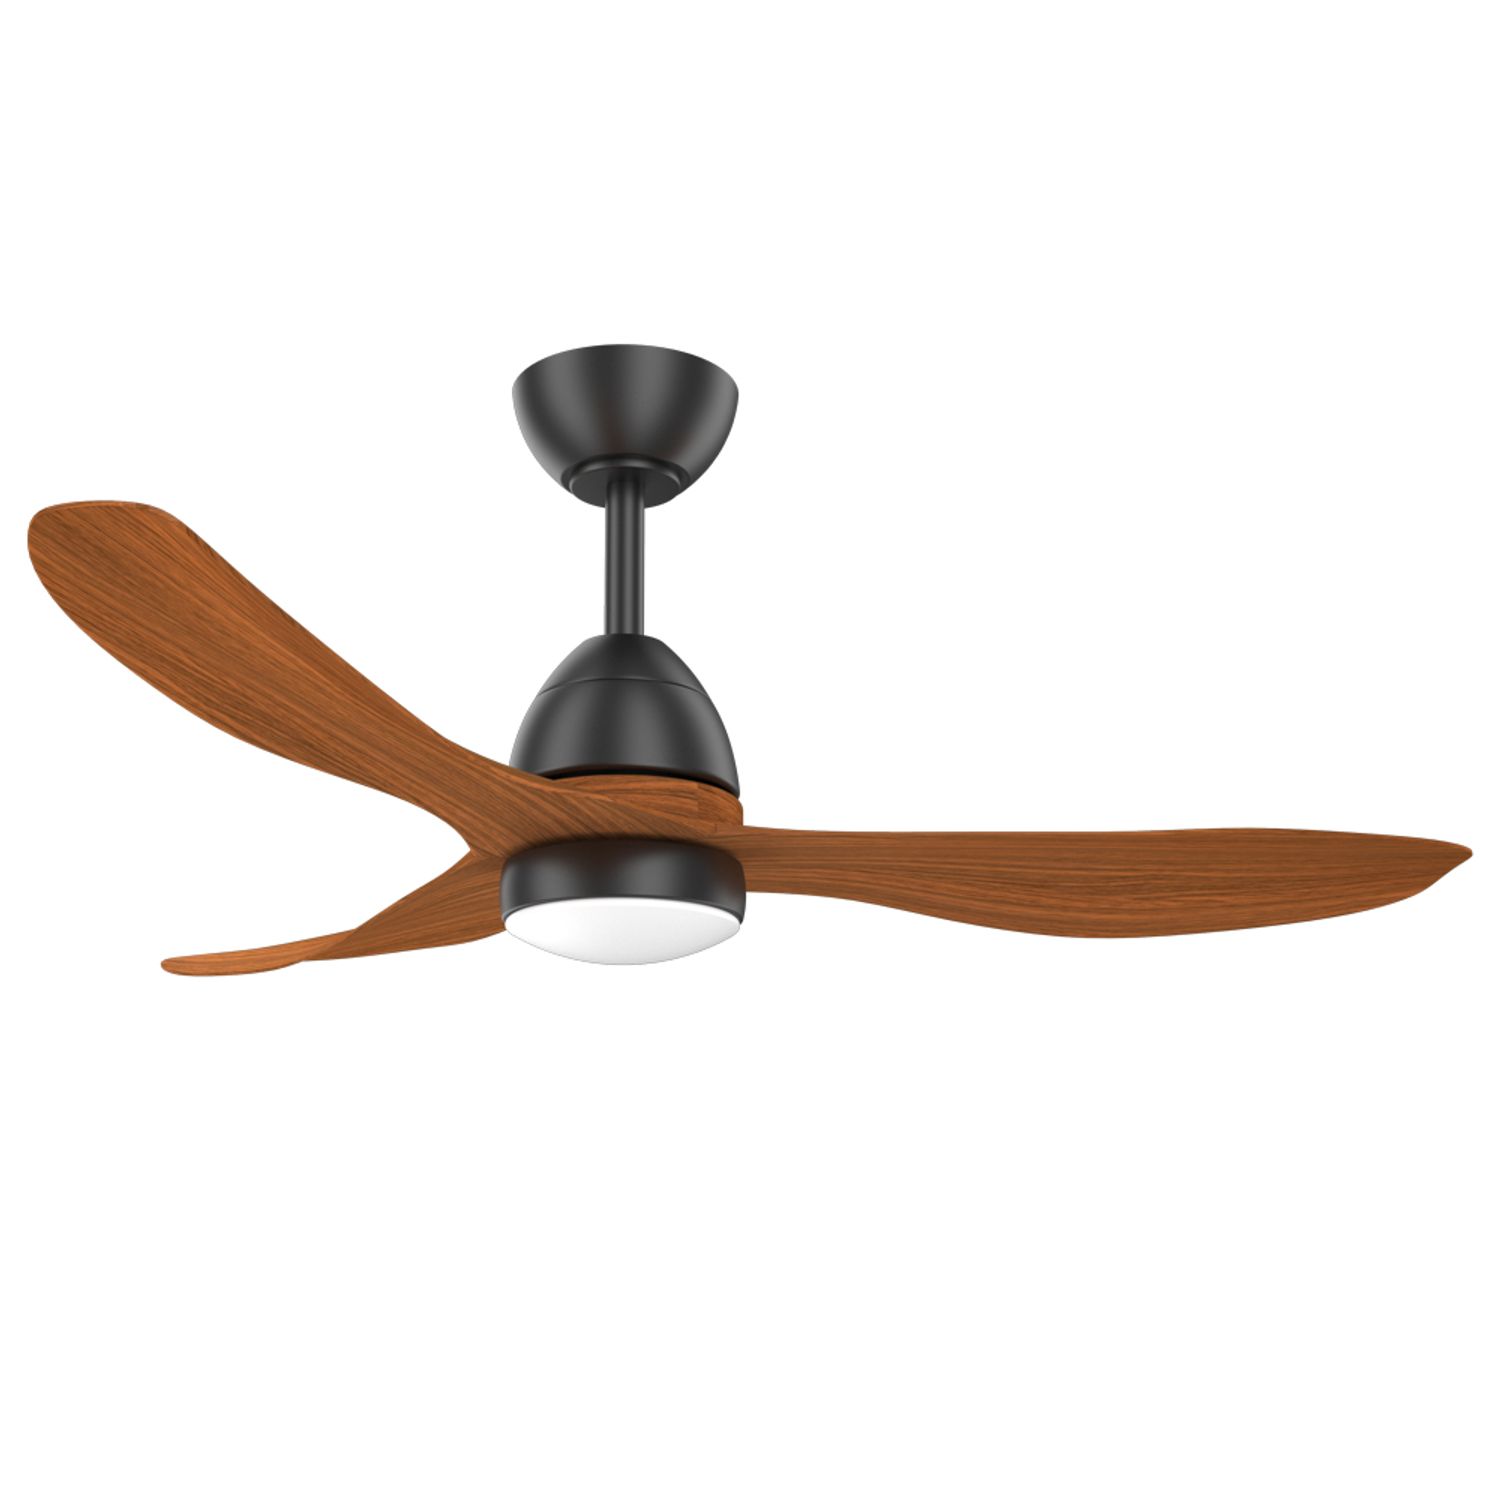 KBS 52" Real Wood Ceiling Fan with Reversible Motor and LED Light